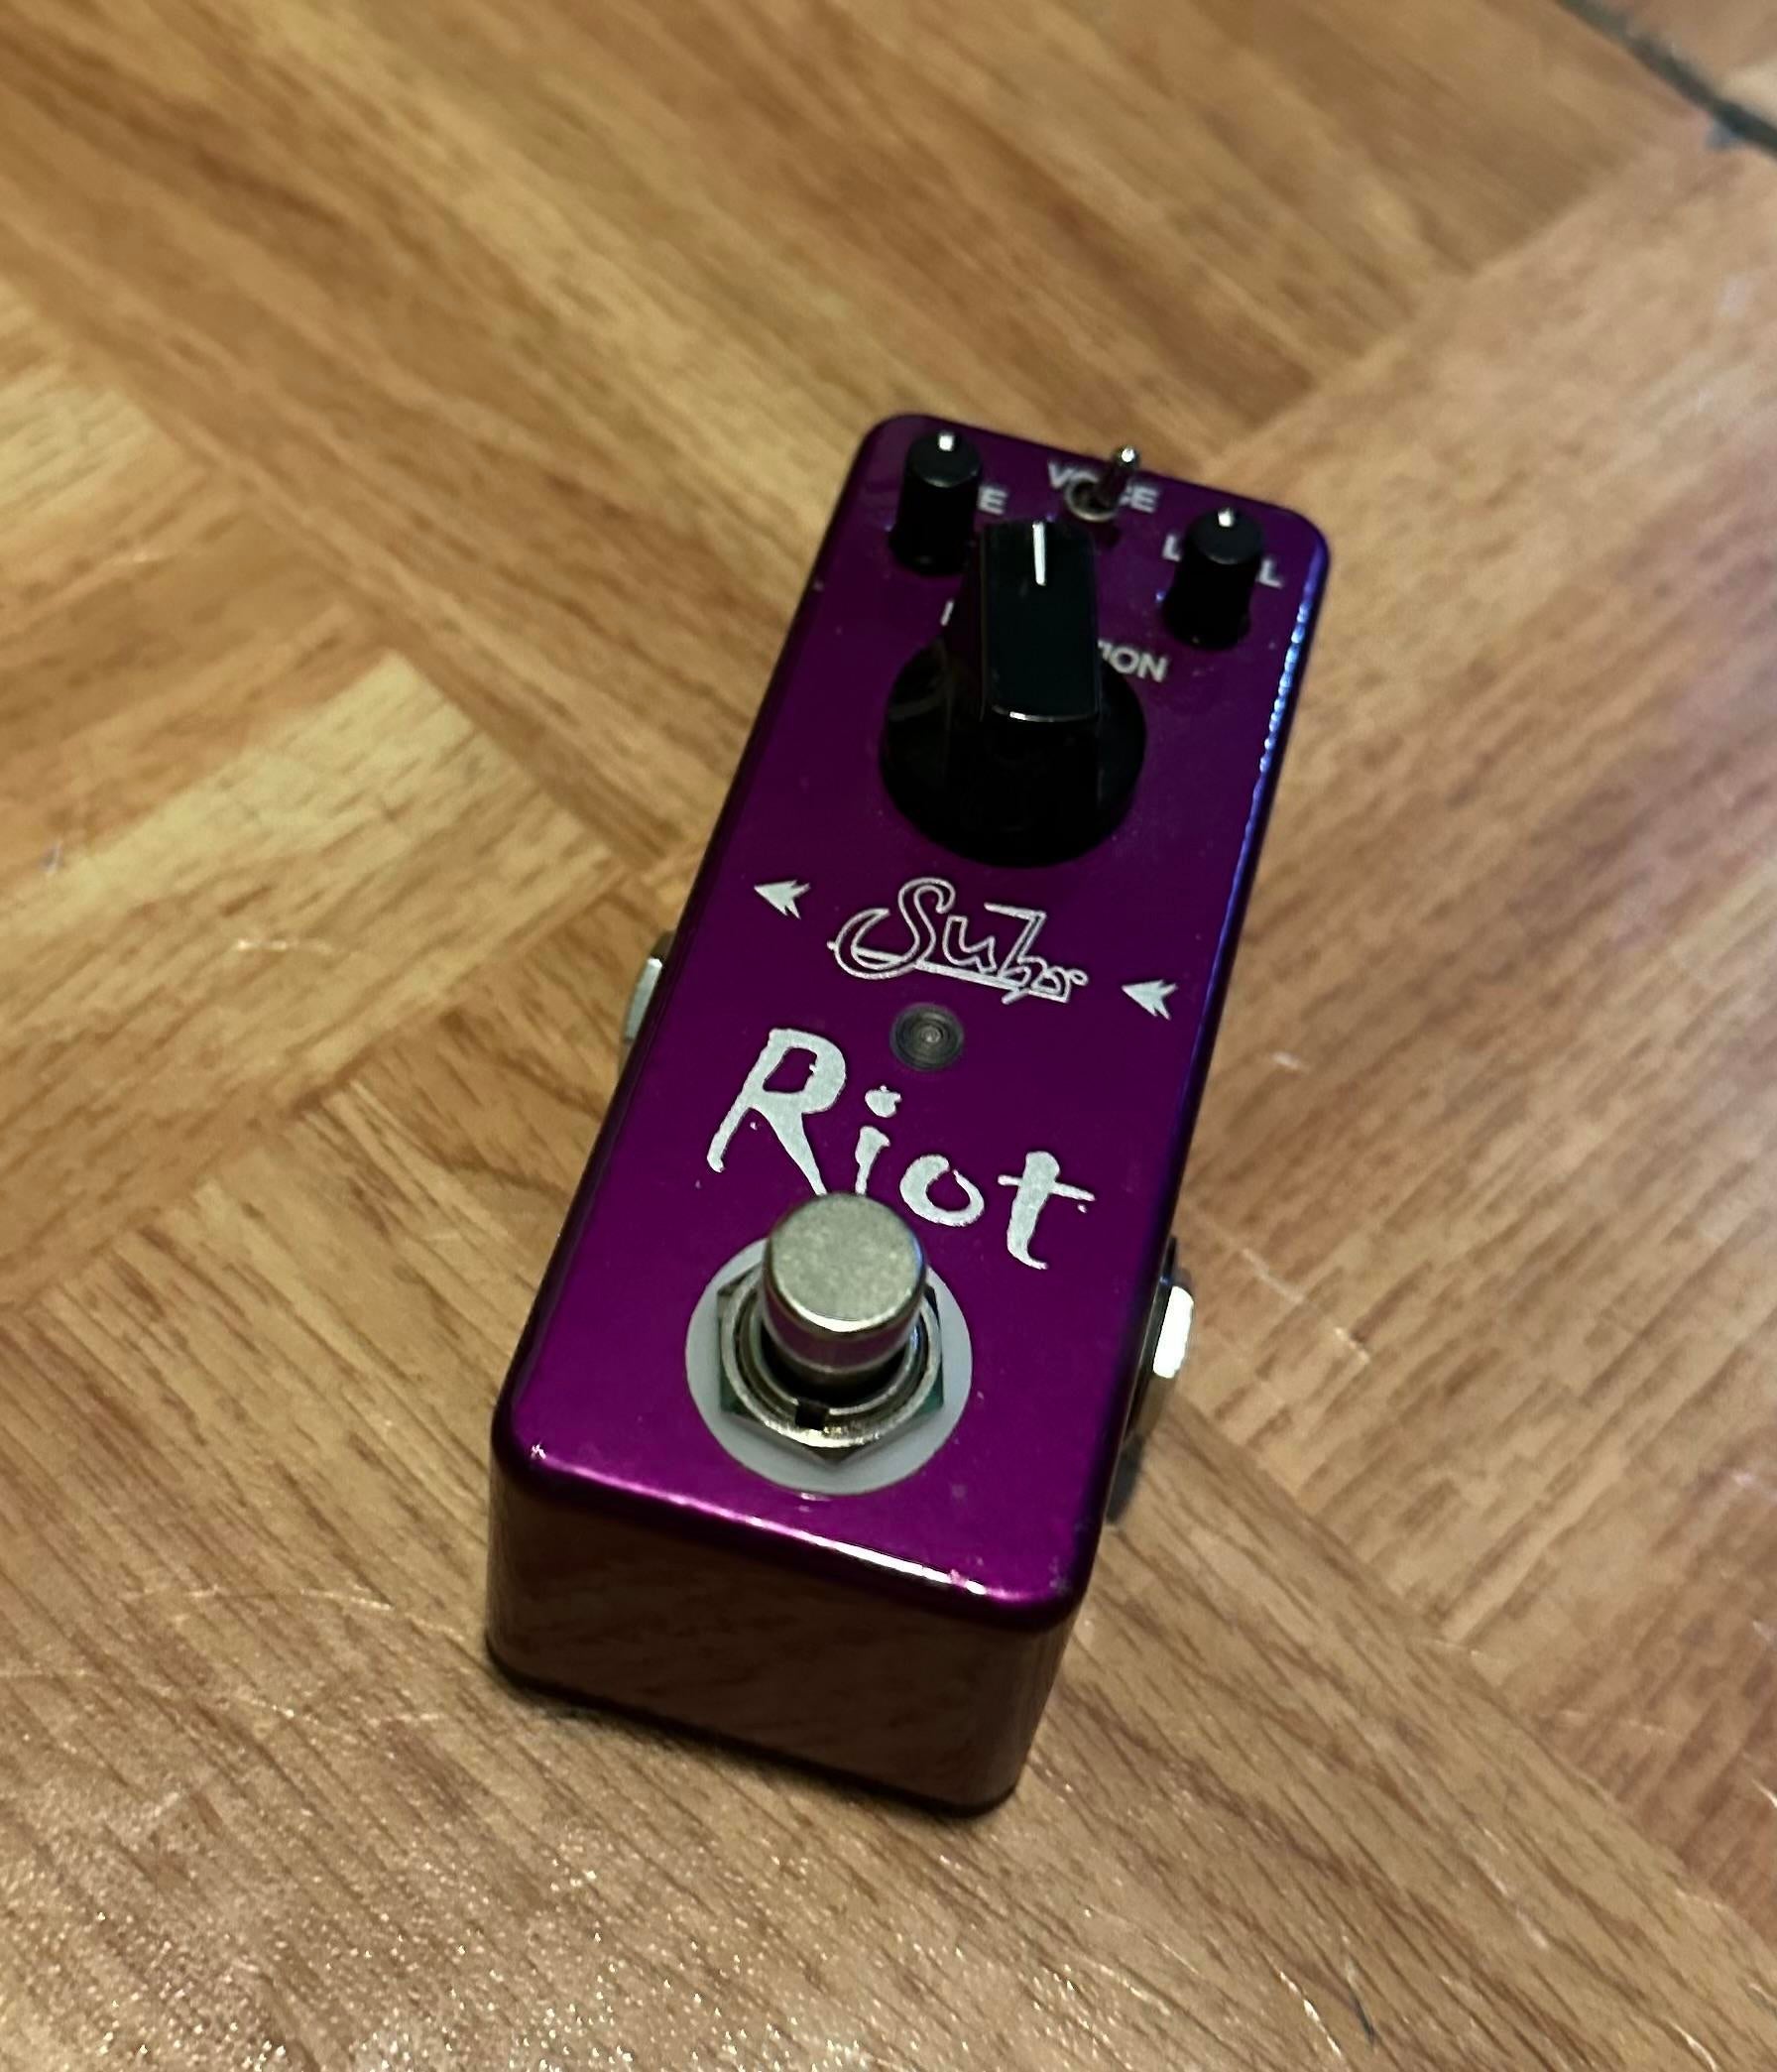 Used Suhr Riot Mini - Sweetwater's Gear Exchange